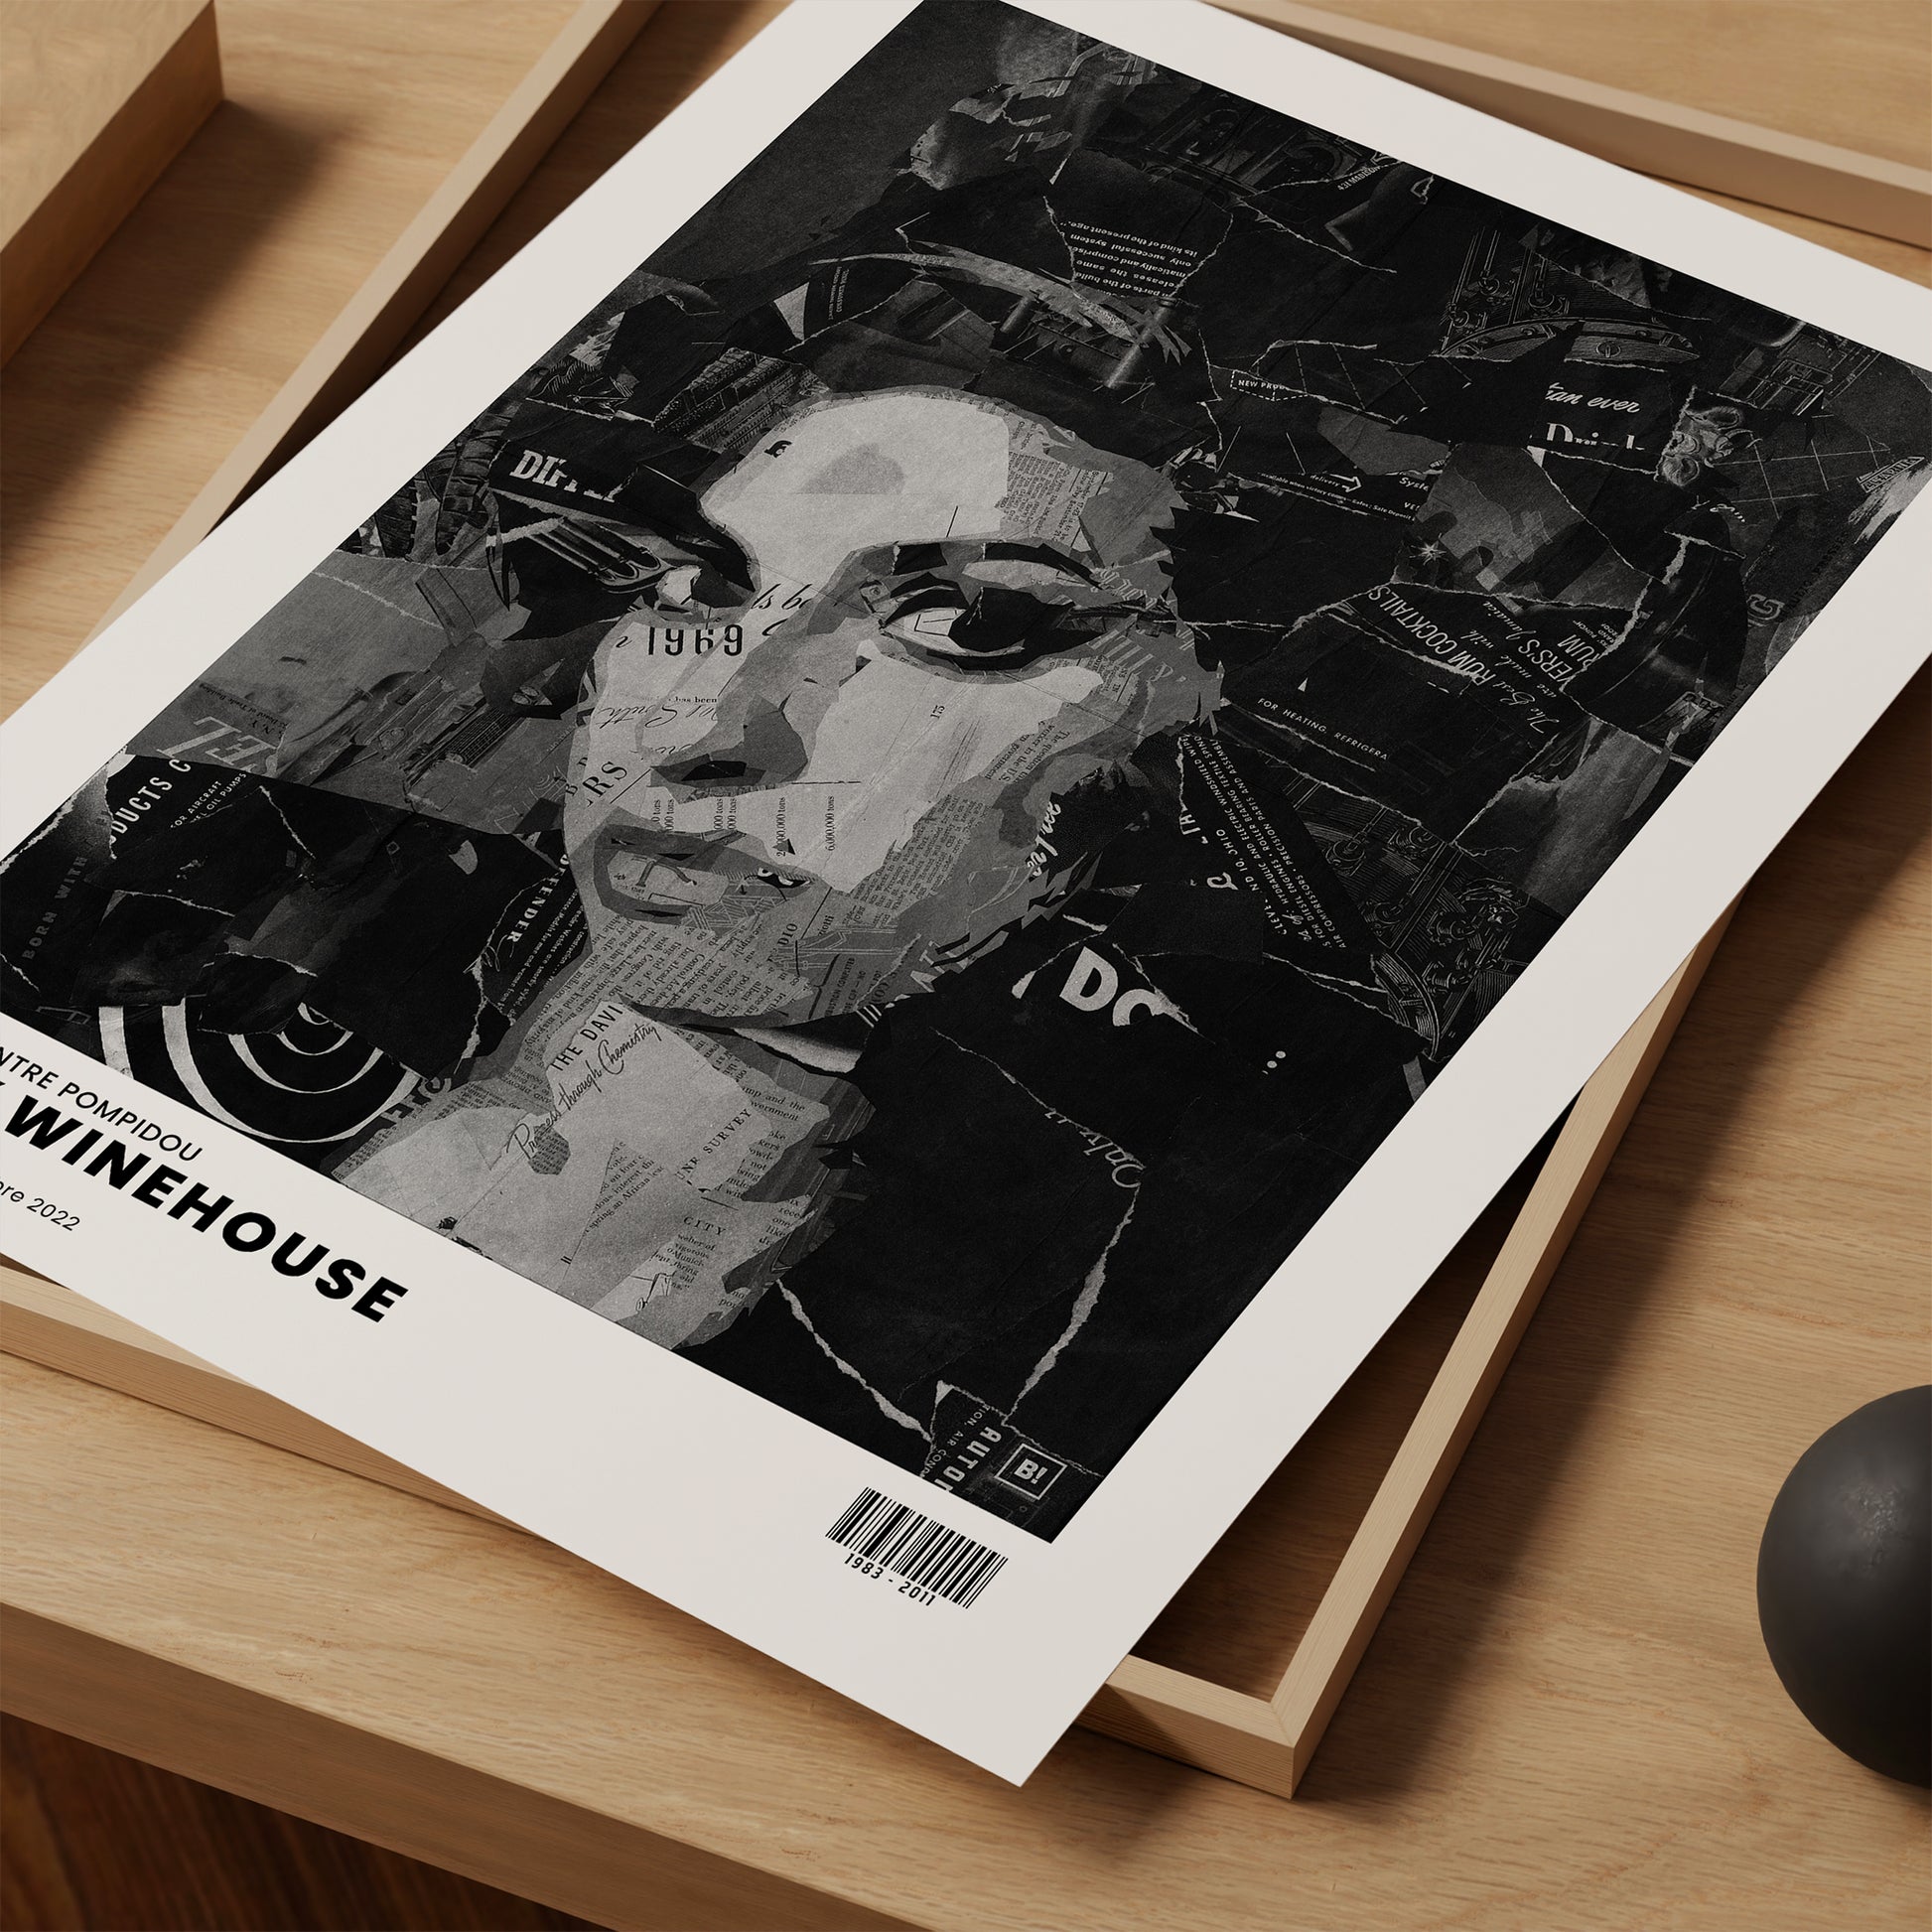 Be inspired by Iconic Amy Winehouse Paris Centre Pompidou Exhibition Art Print. The artwork is presented as a print close up that captures its timeless beauty in every detail.